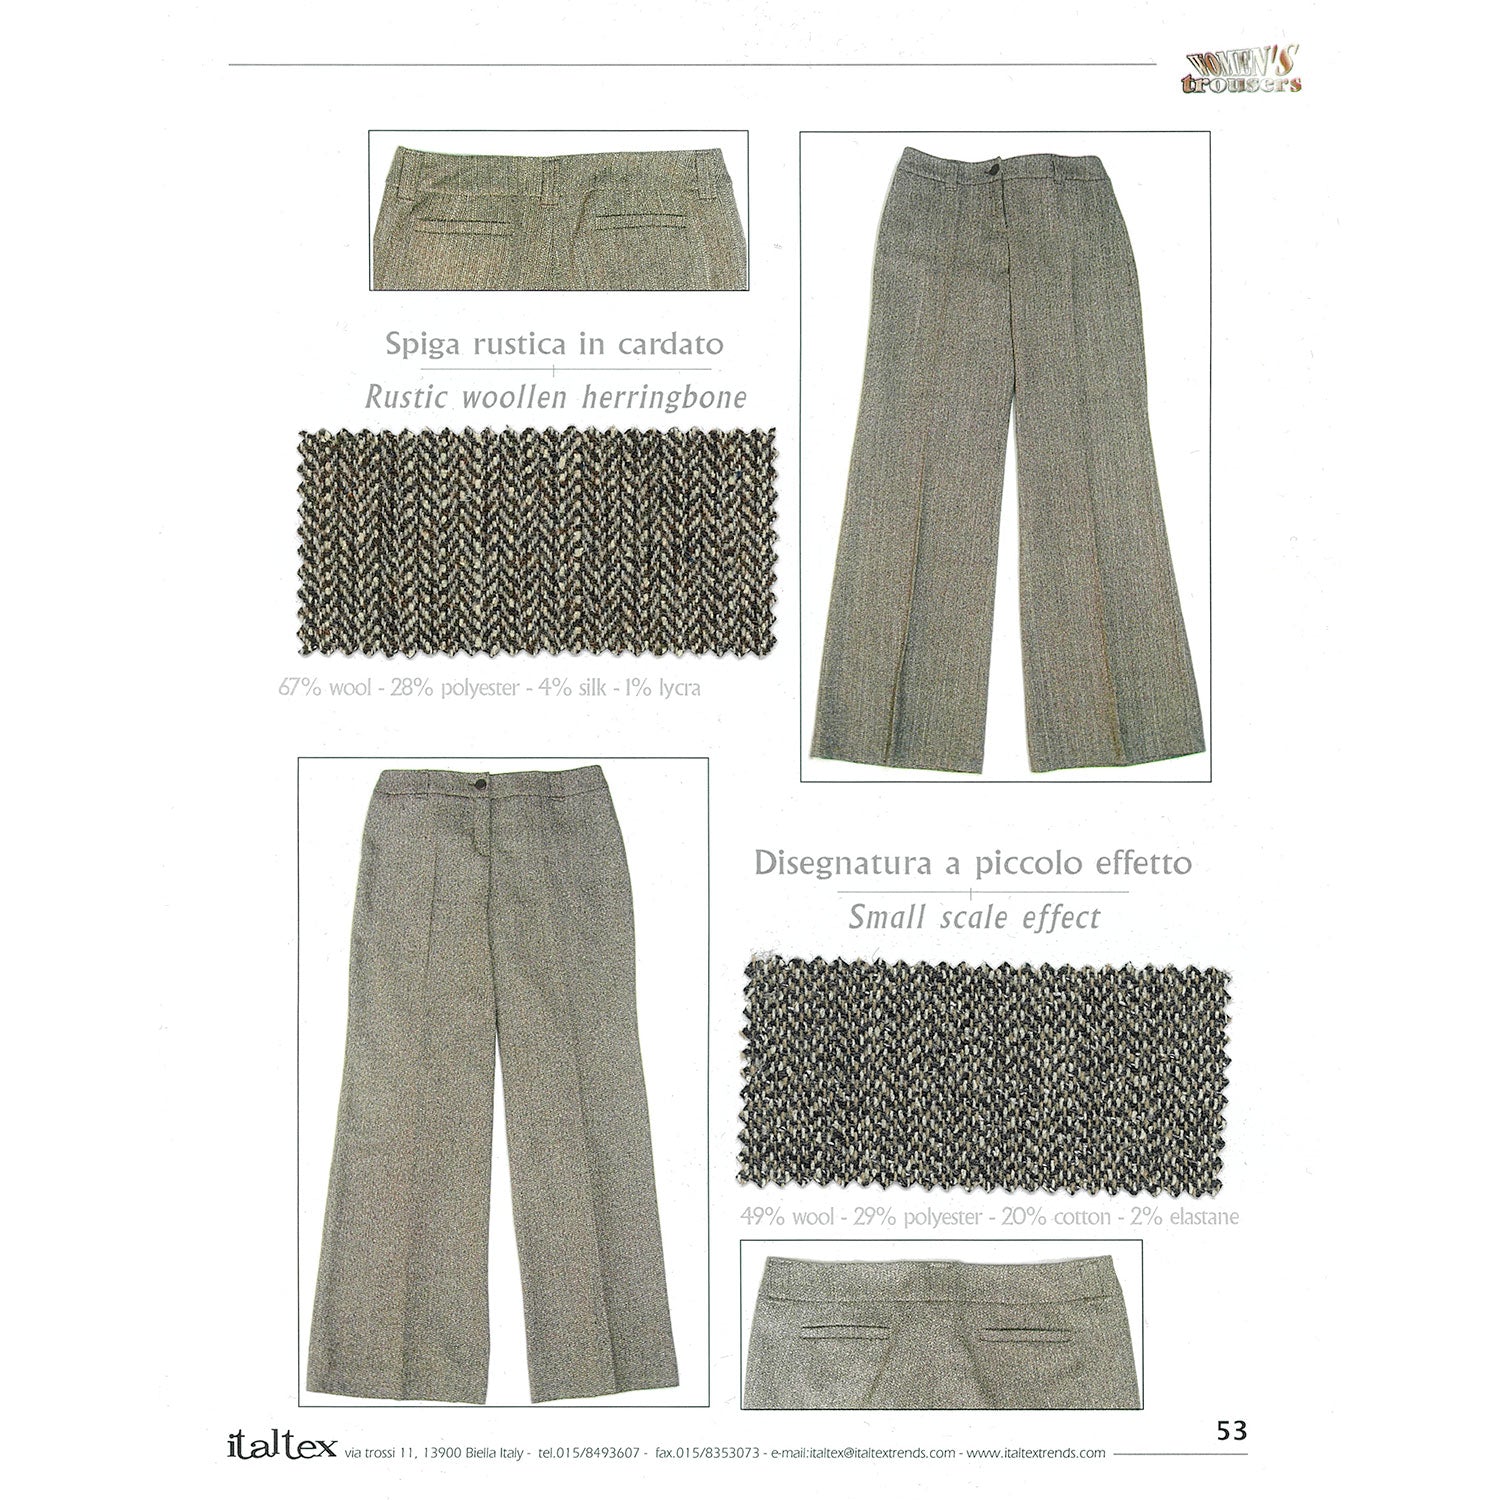 Womens's Trousers from Winter 2006/07